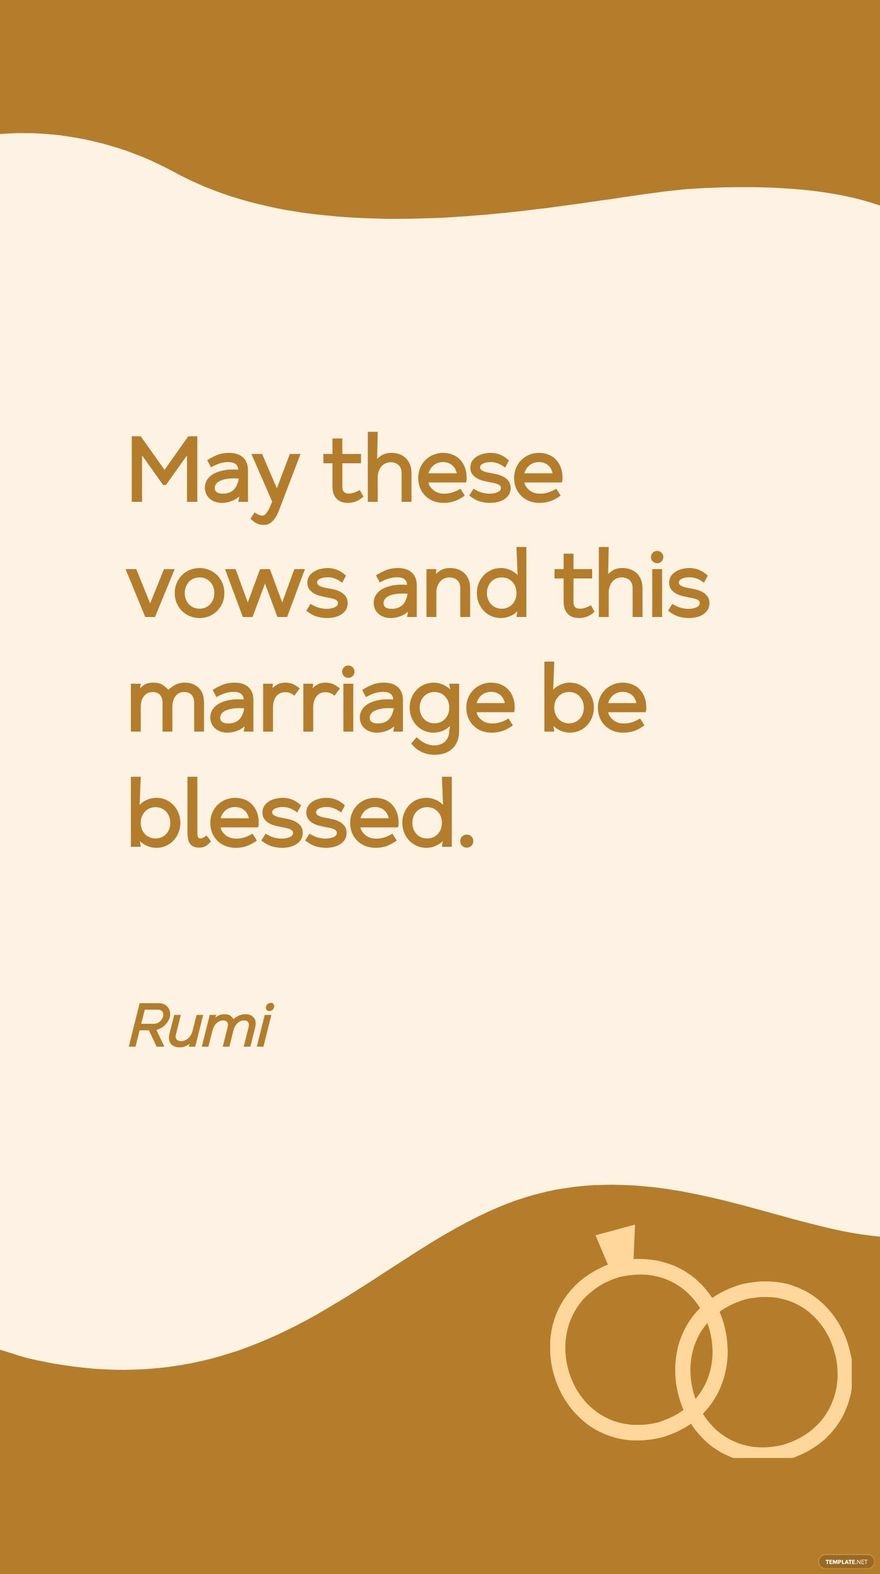 Free Rumi - May these vows and this marriage be blessed. in JPG